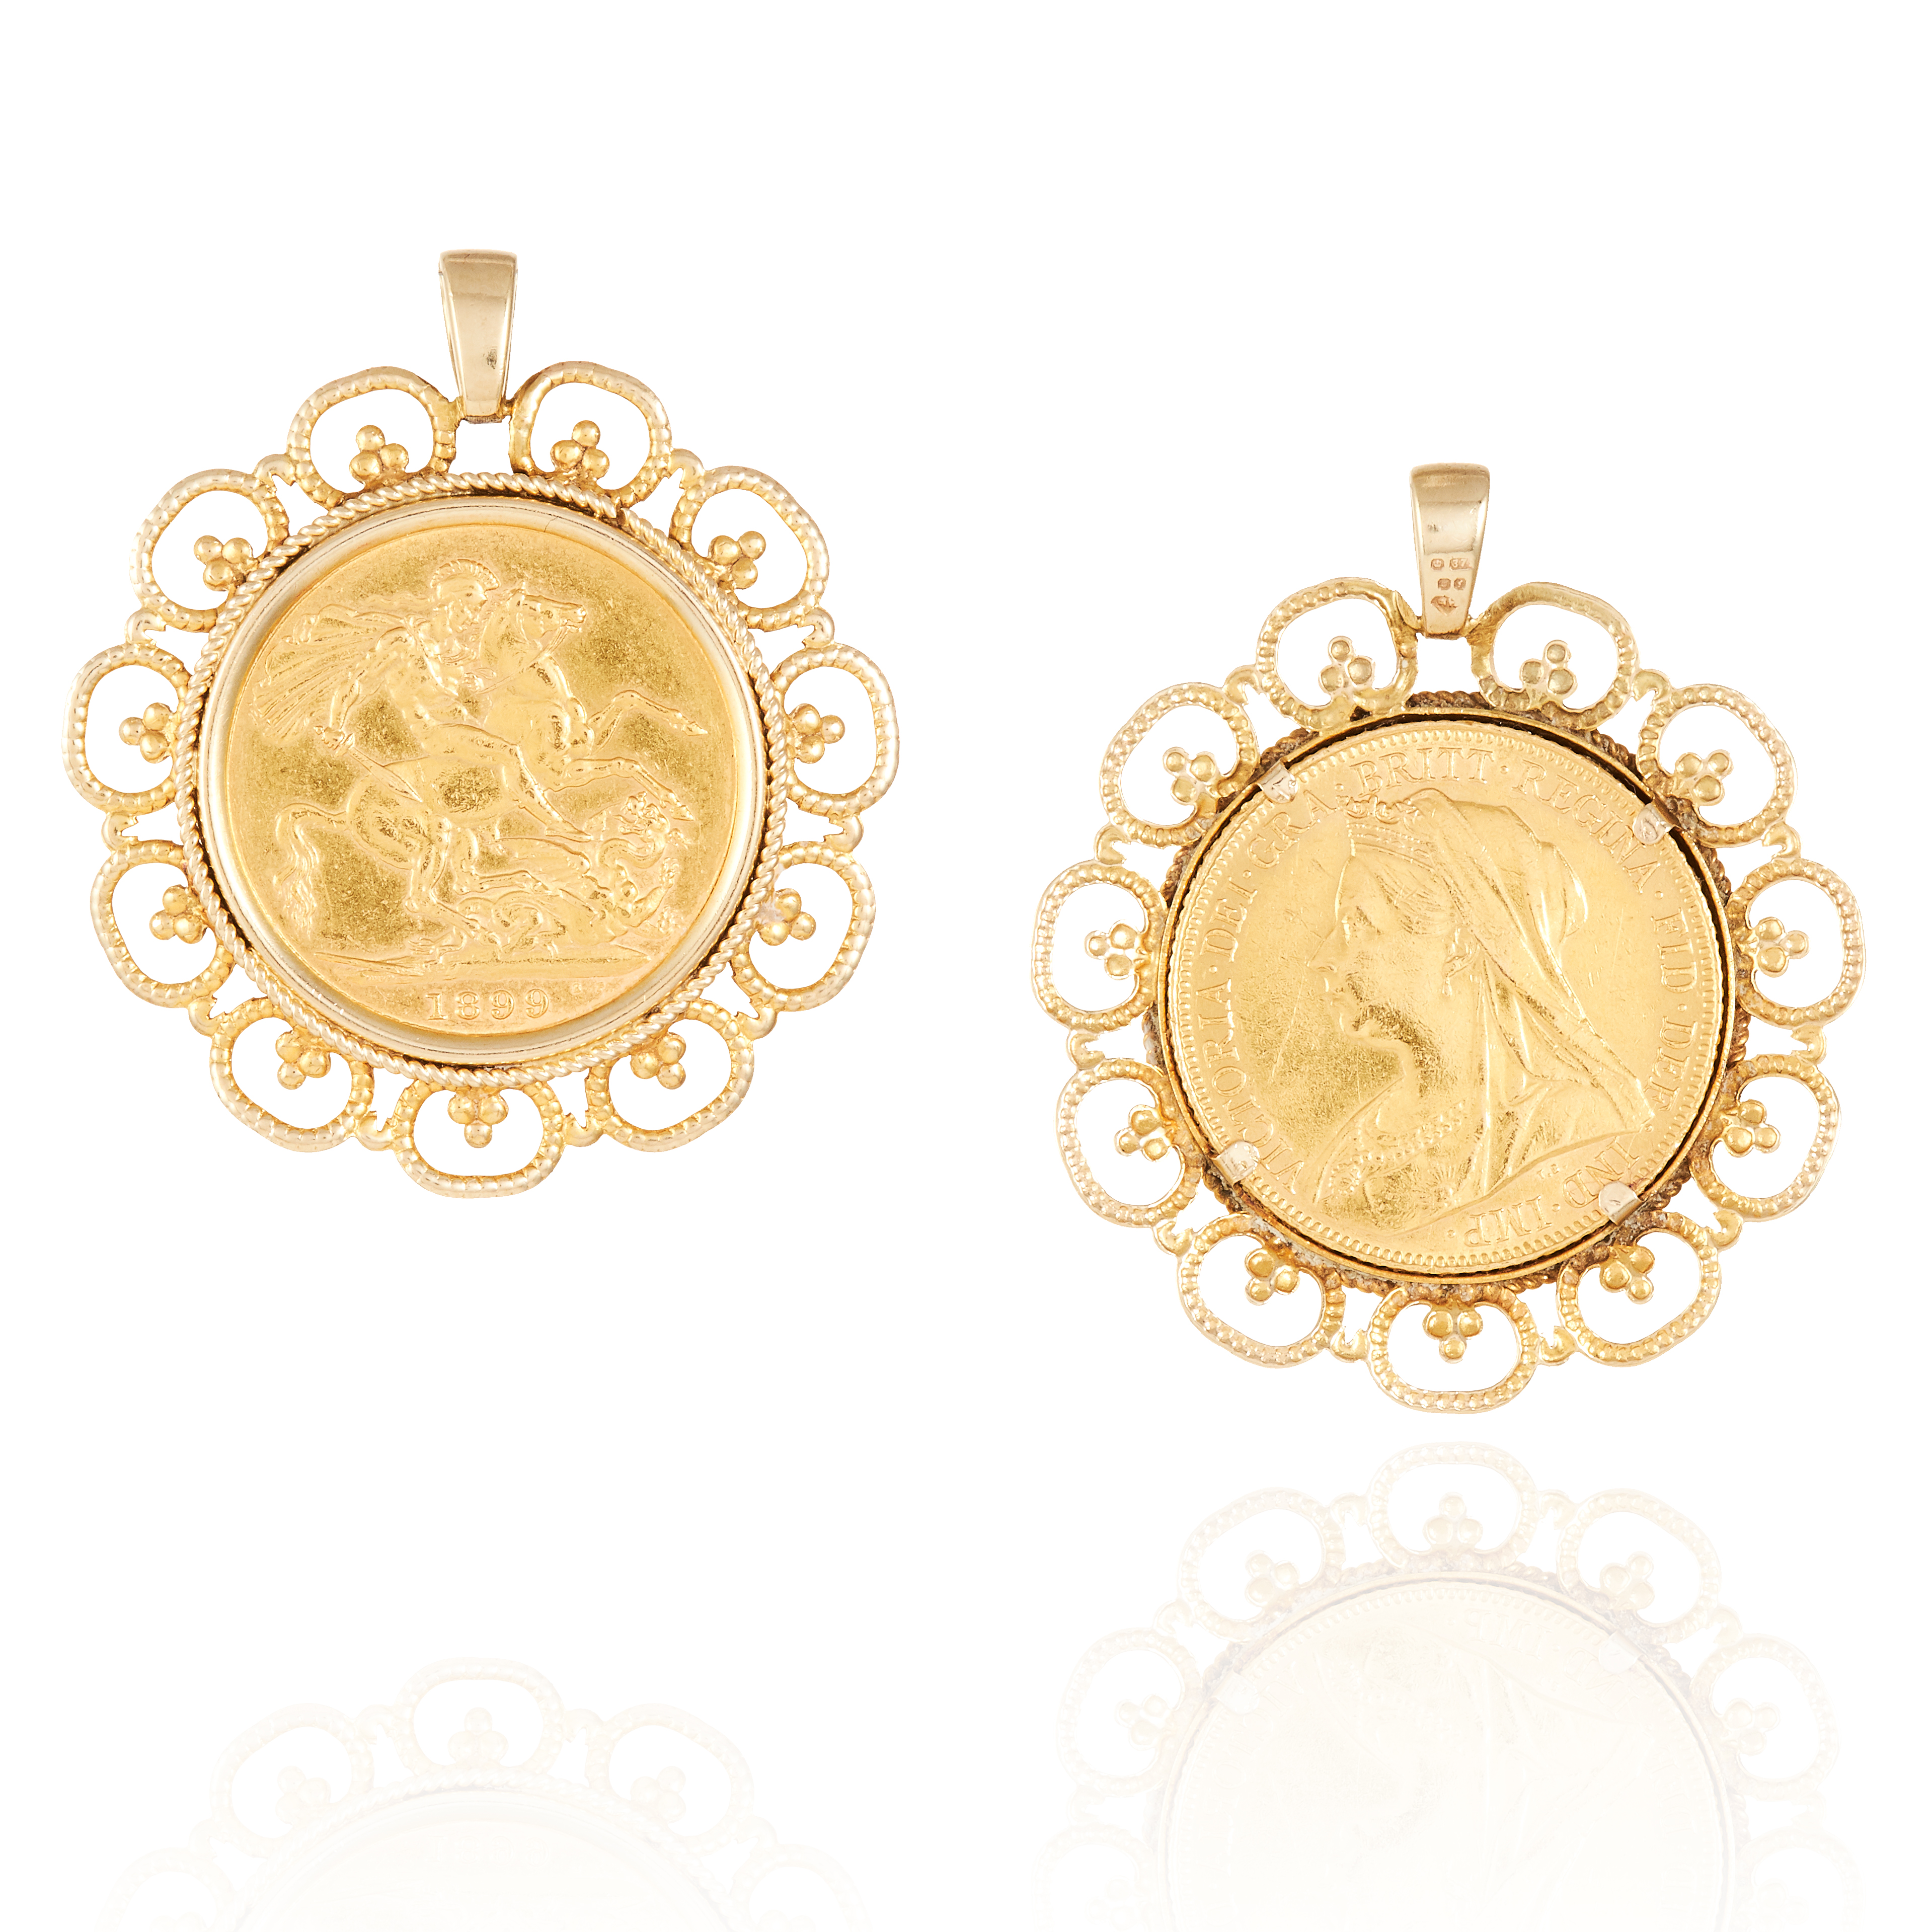 AN ANTIQUE VICTORIAN FULL SOVEREIGN PENDANT in 22ct yellow gold, the Victorian full sovereign in a